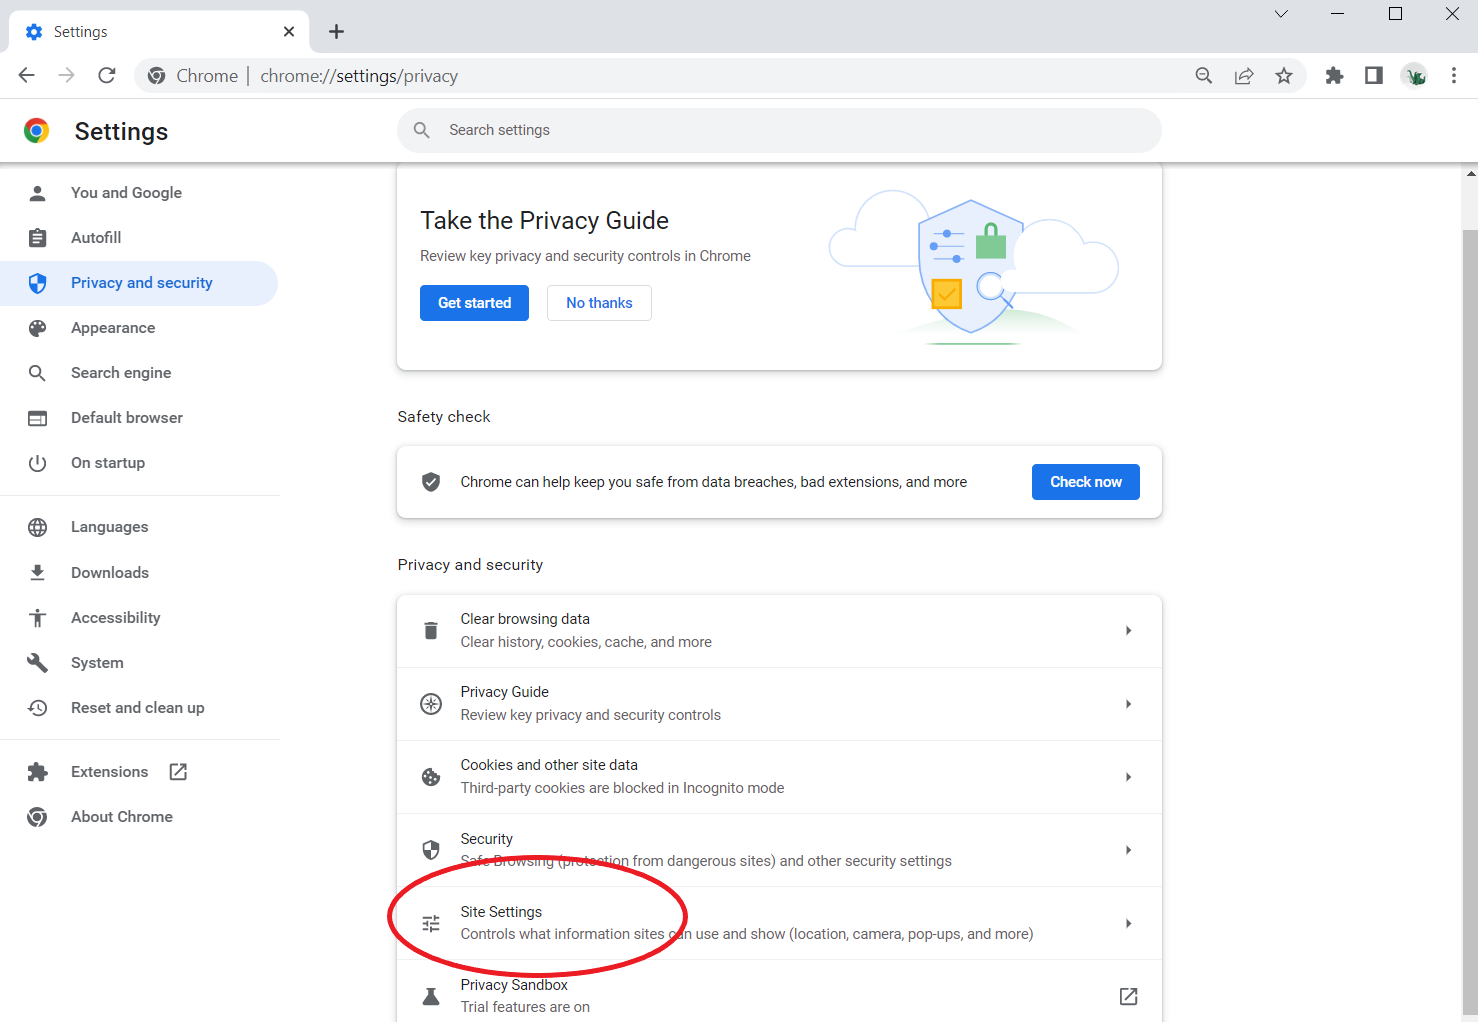 Screenshot of the Google Chrome Settings/Privacy and security screen with the Site Settings option circled.